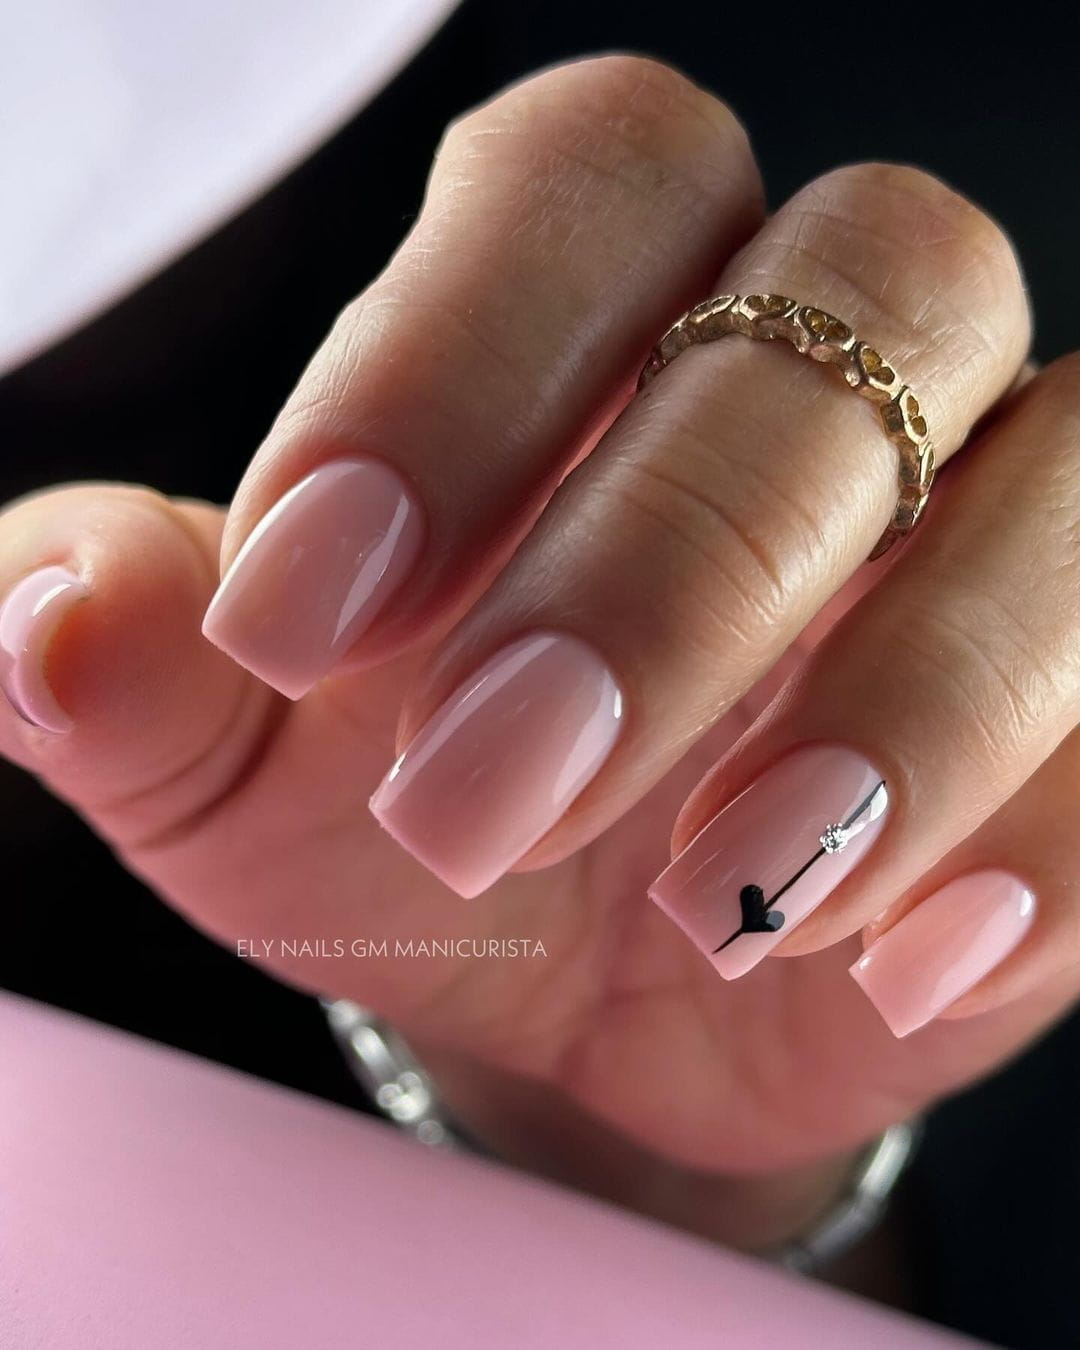 100 Of The Best Spring Inspired Nail Designs images 26